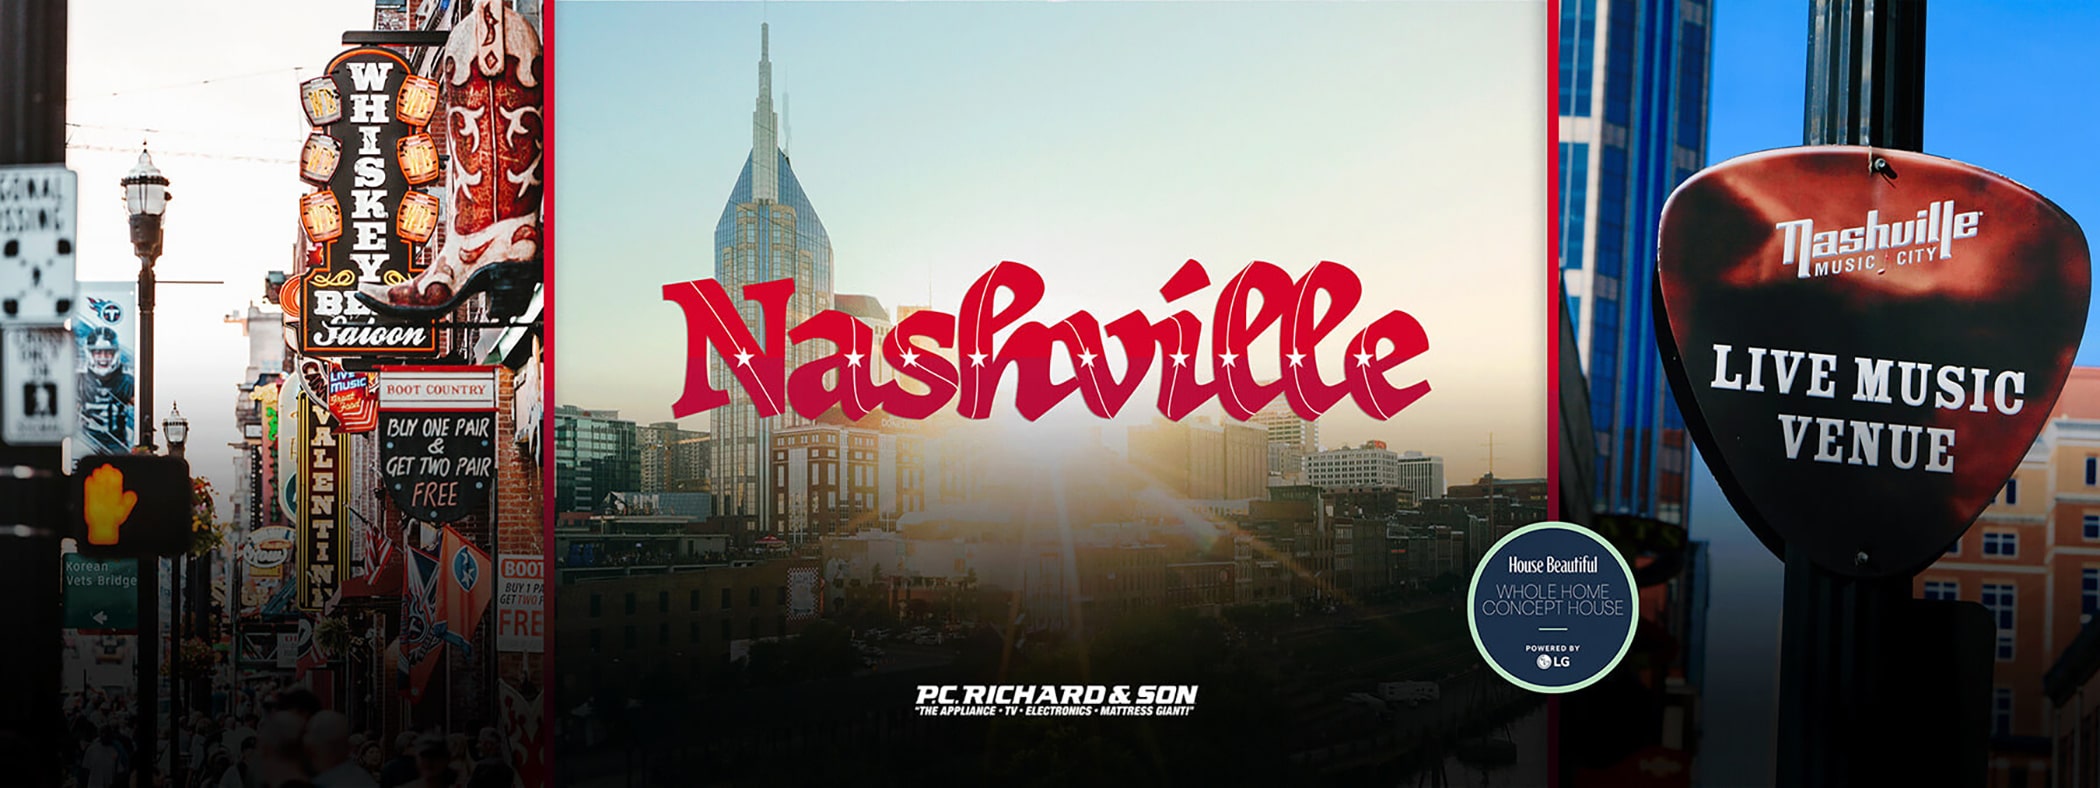 LG: Win LG laundry appliances, an LG OLED TV & a trip to Nashville